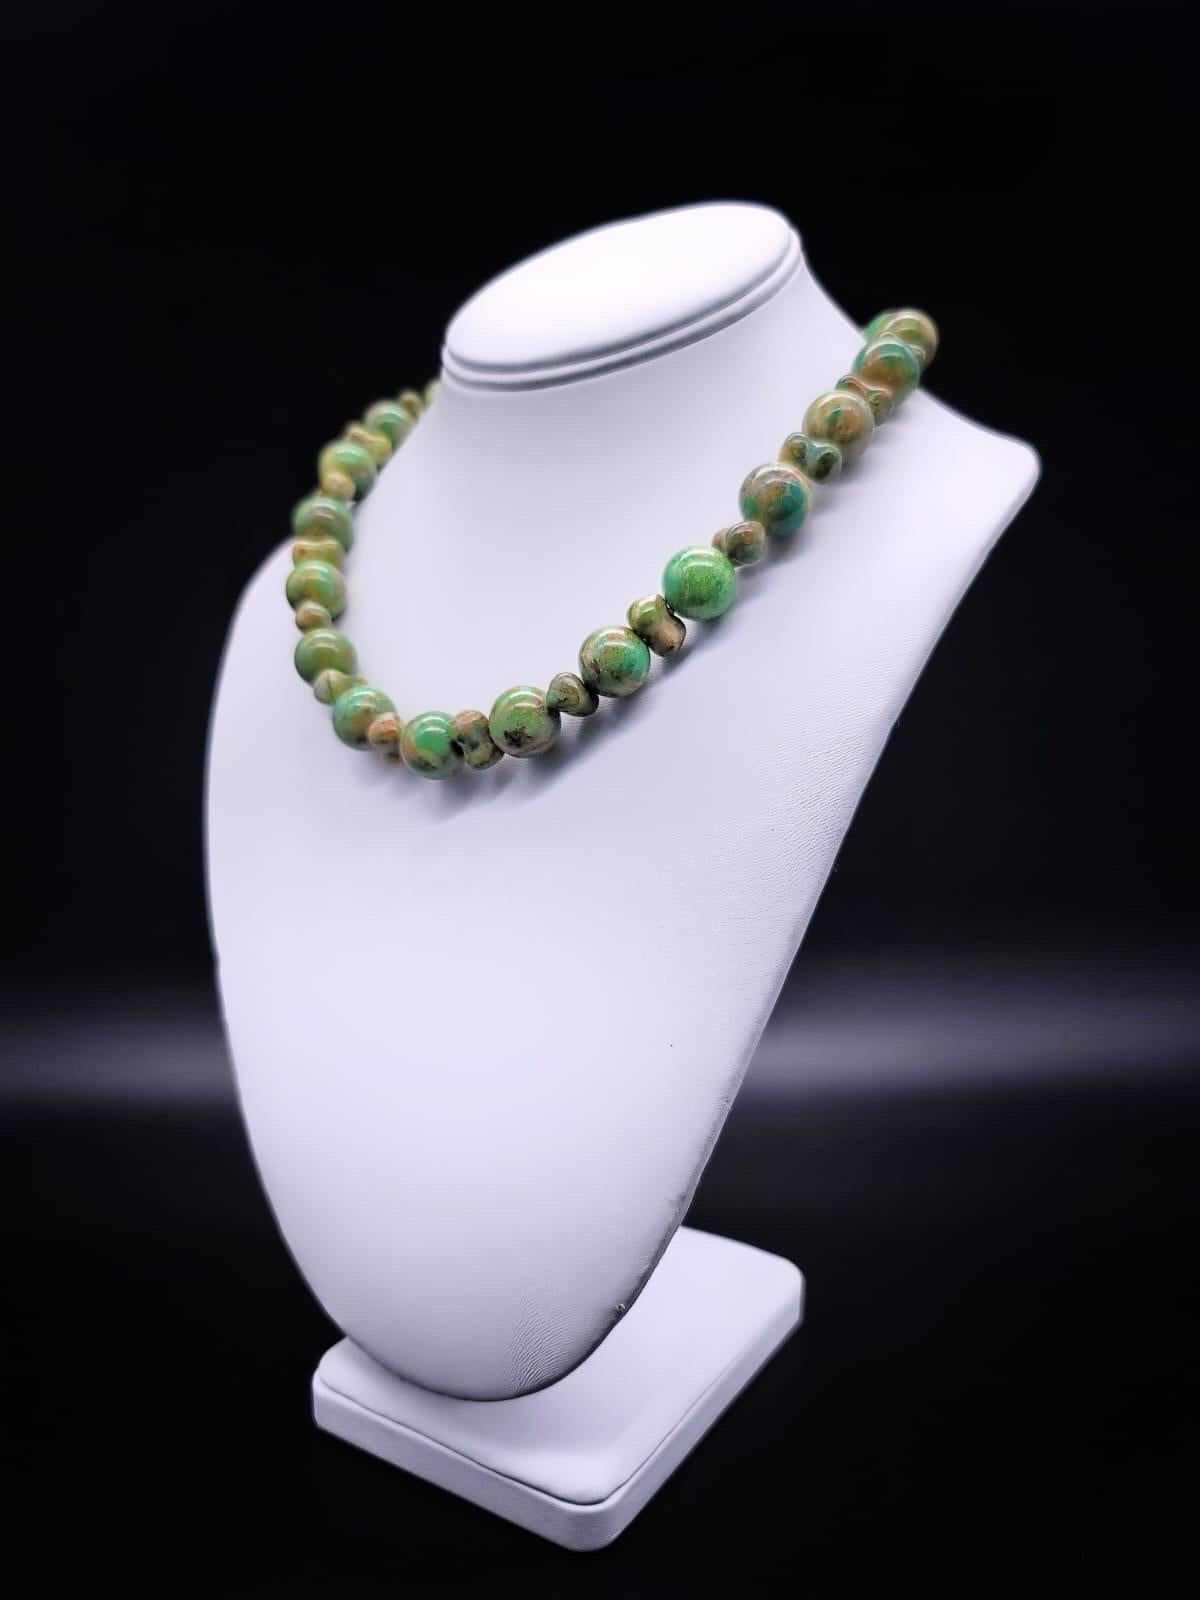 One-of-a-Kind

 Carico Turquoise is a sought-after gemstone known for its striking green coloration. Mined in the Carico Lake region in Nevada it is highly prized for its unique blend of yellow and green tones. The necklace composed of round and